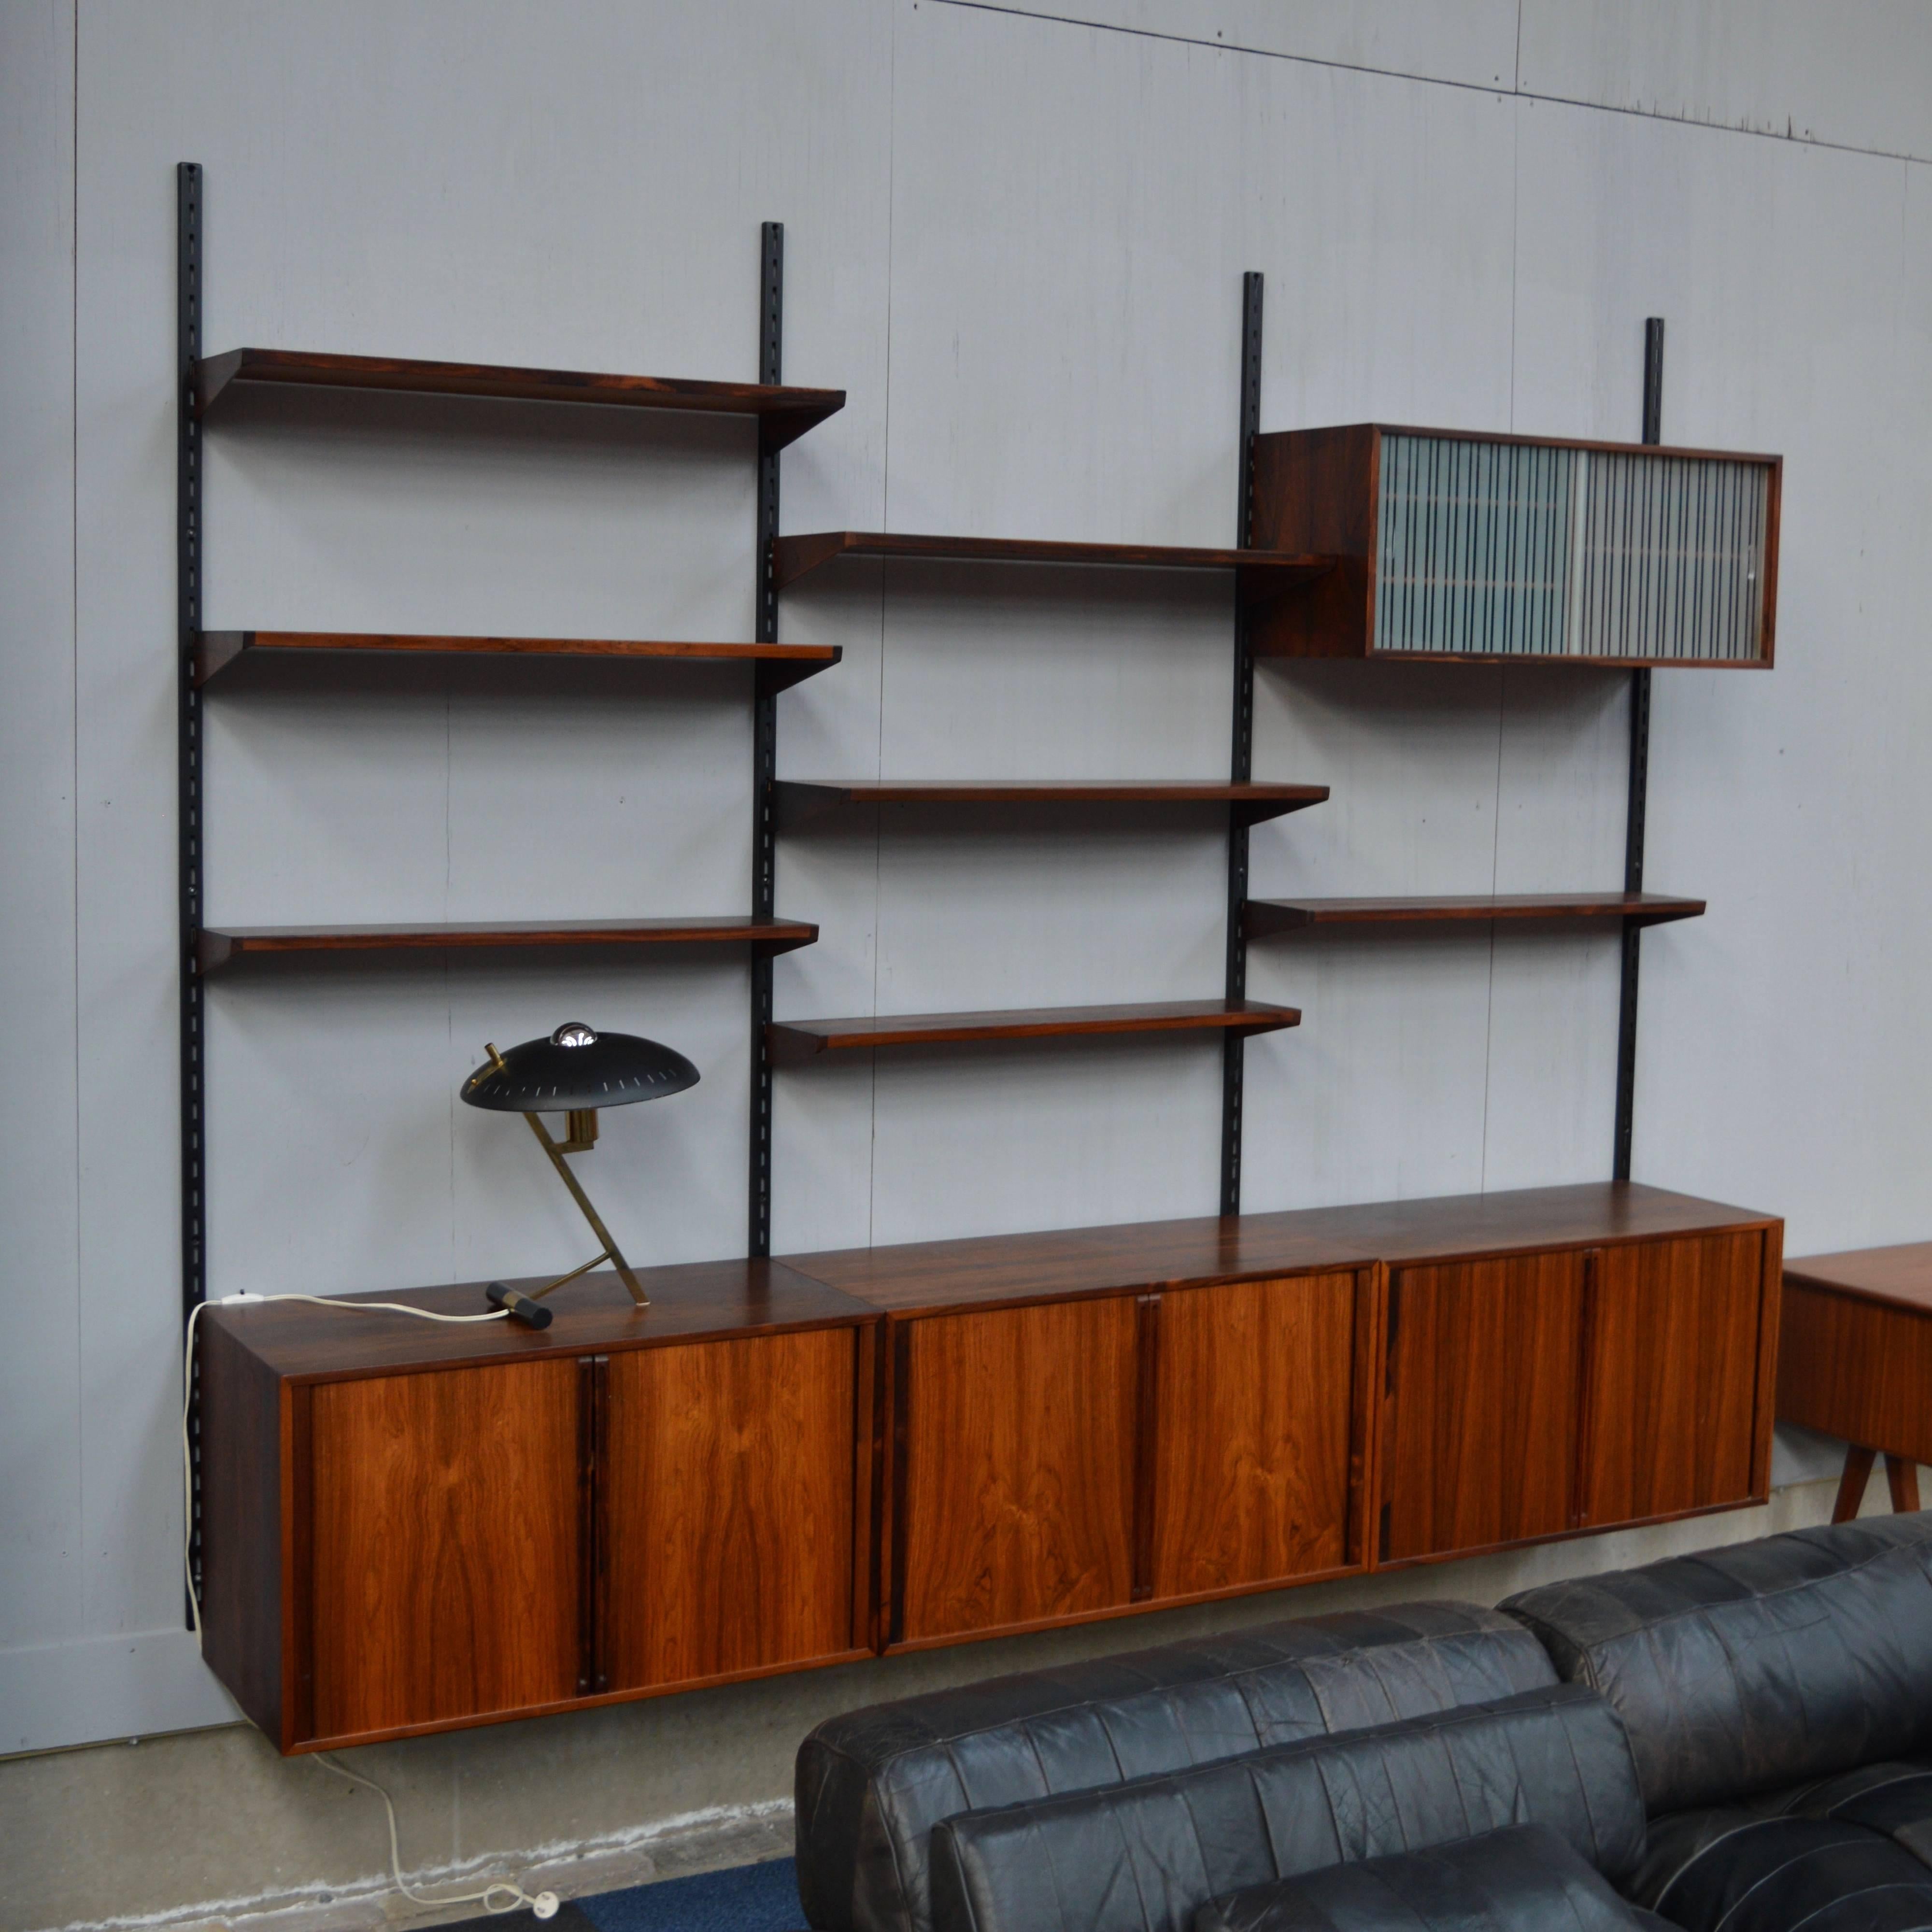 Brazilian rosewood wall unit by Kai Kristiansen for FM Møbler, Denmark.
The cabinets have sliding doors wich are made of highly crafted lamellae that turn inside.
Inside two of the cabinets there are two birchwood drawers lined with green